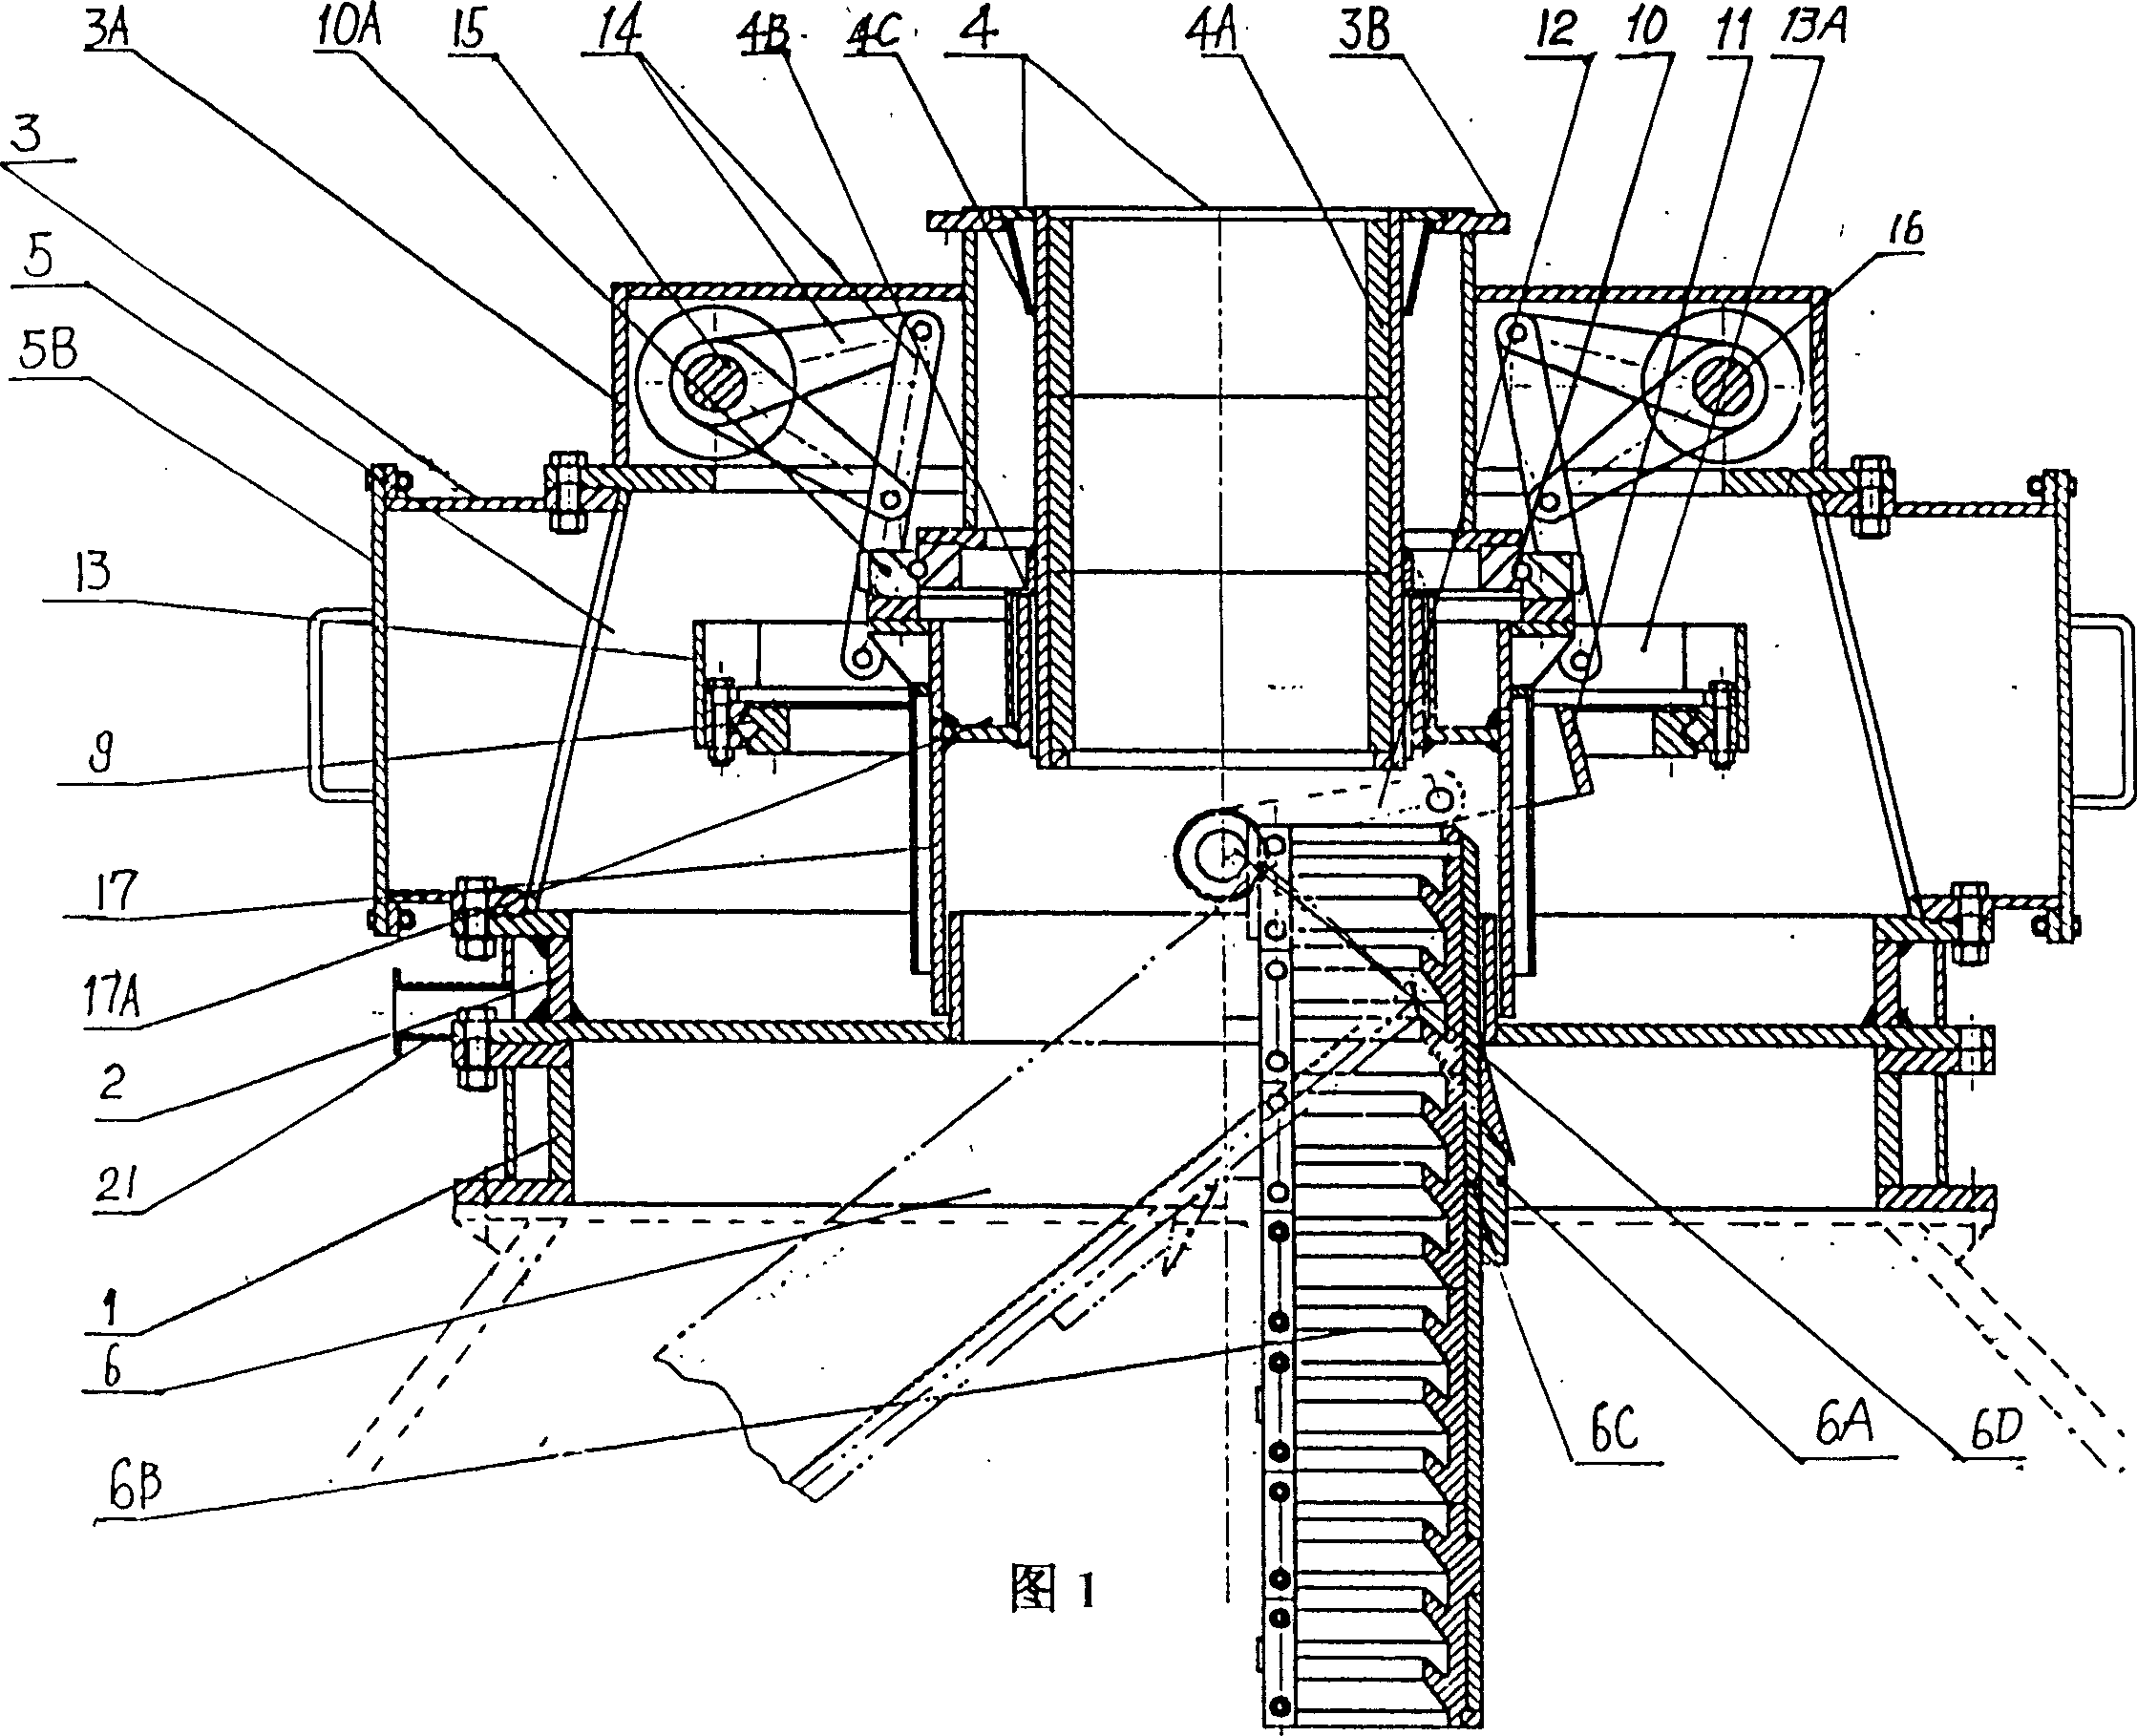 Chute-type furnace roof distributor driven via self-centering combined link rod